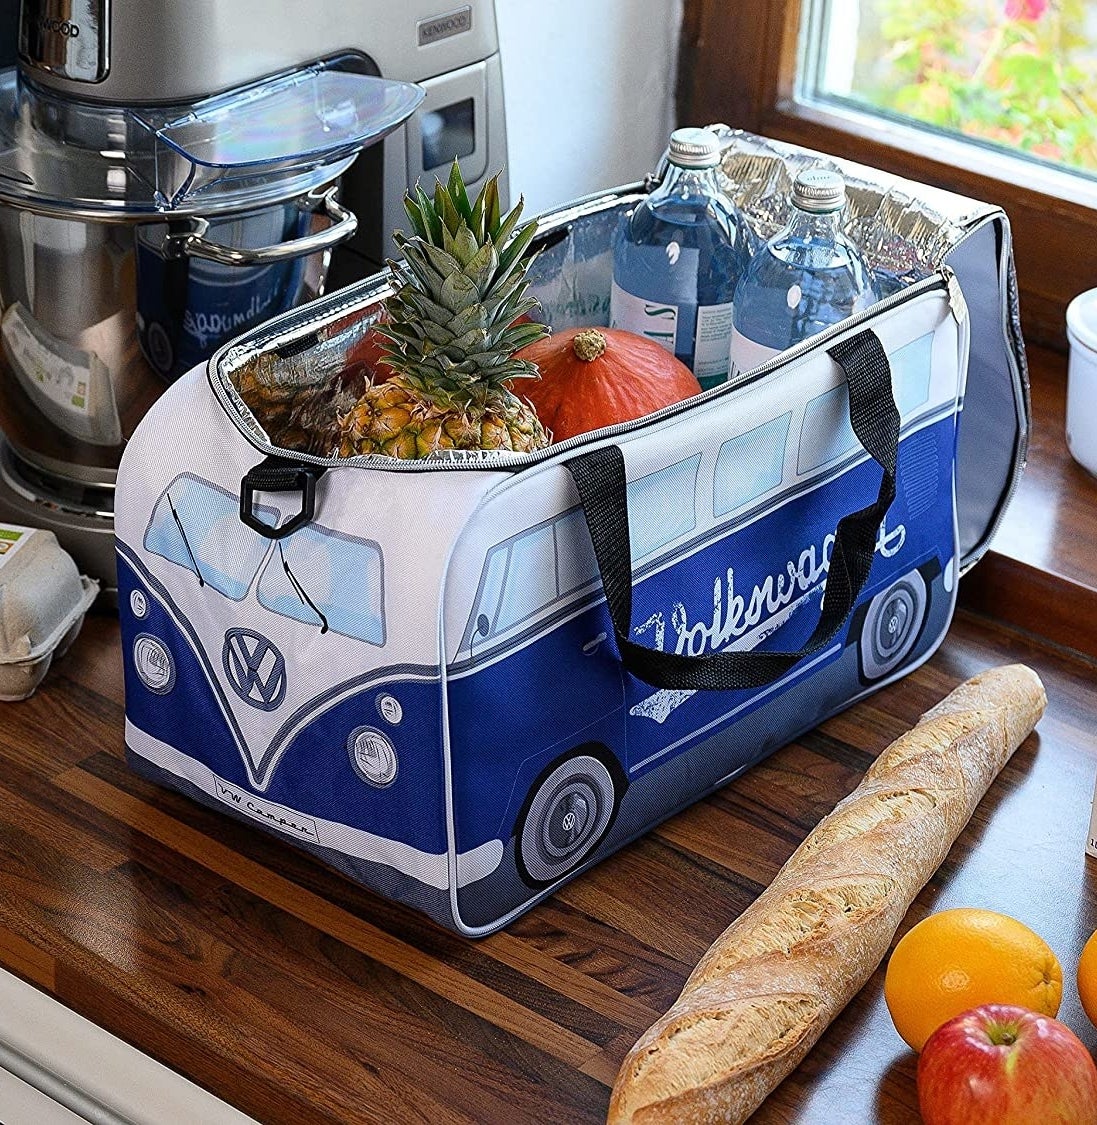 the cooler on a counter with food in it